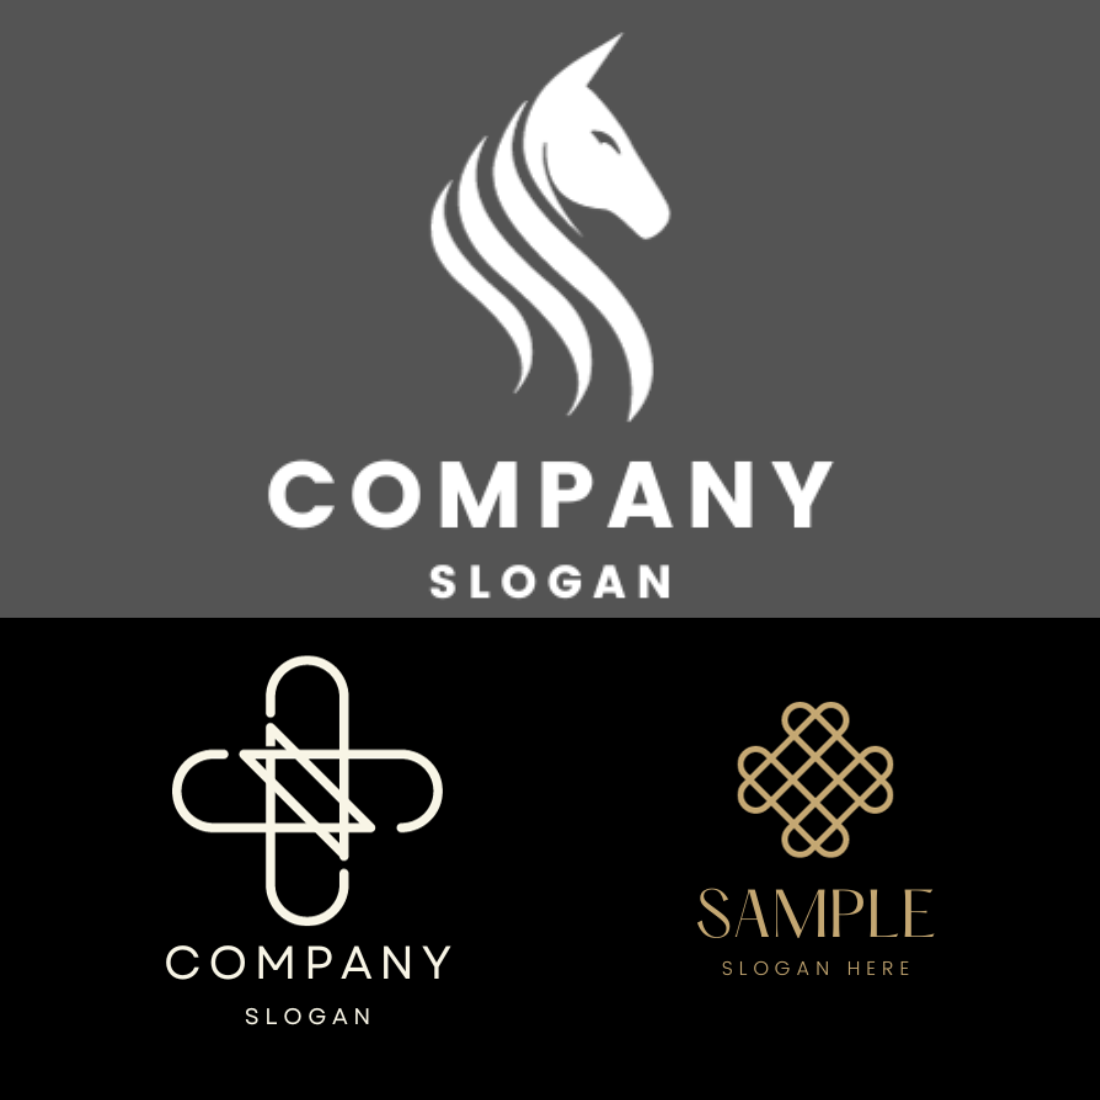 Professional and Minimalist Logos for 1$ preview image.